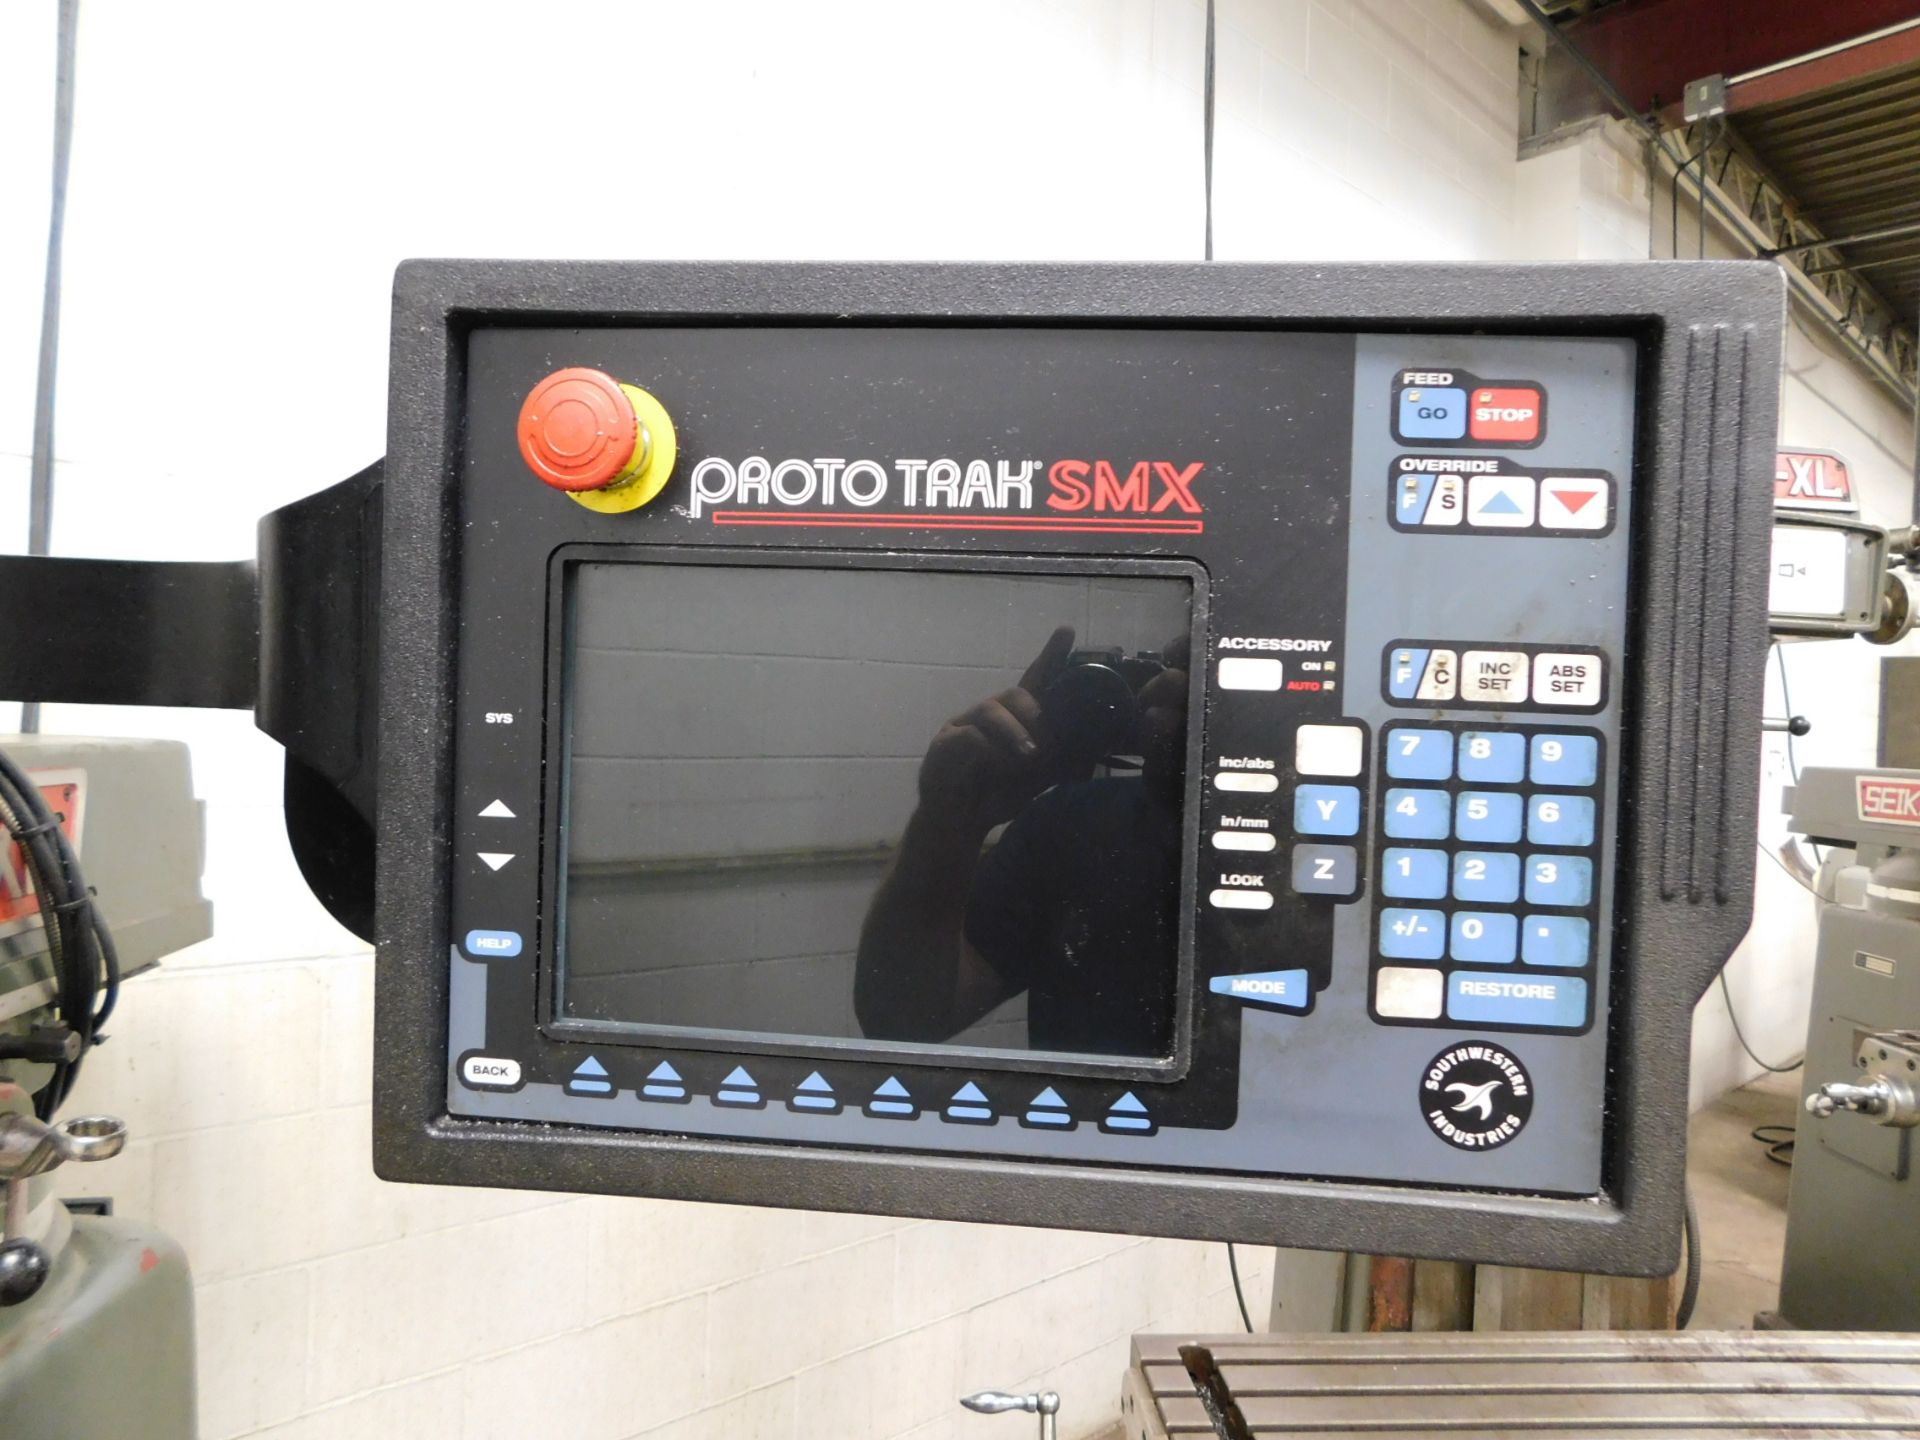 Seiki XL Model 3VH CNC Vertical Mill with Prototrak SMX CNC Control, 2-Axis, 3 HP, Mill s/n 5677,10" - Image 3 of 7